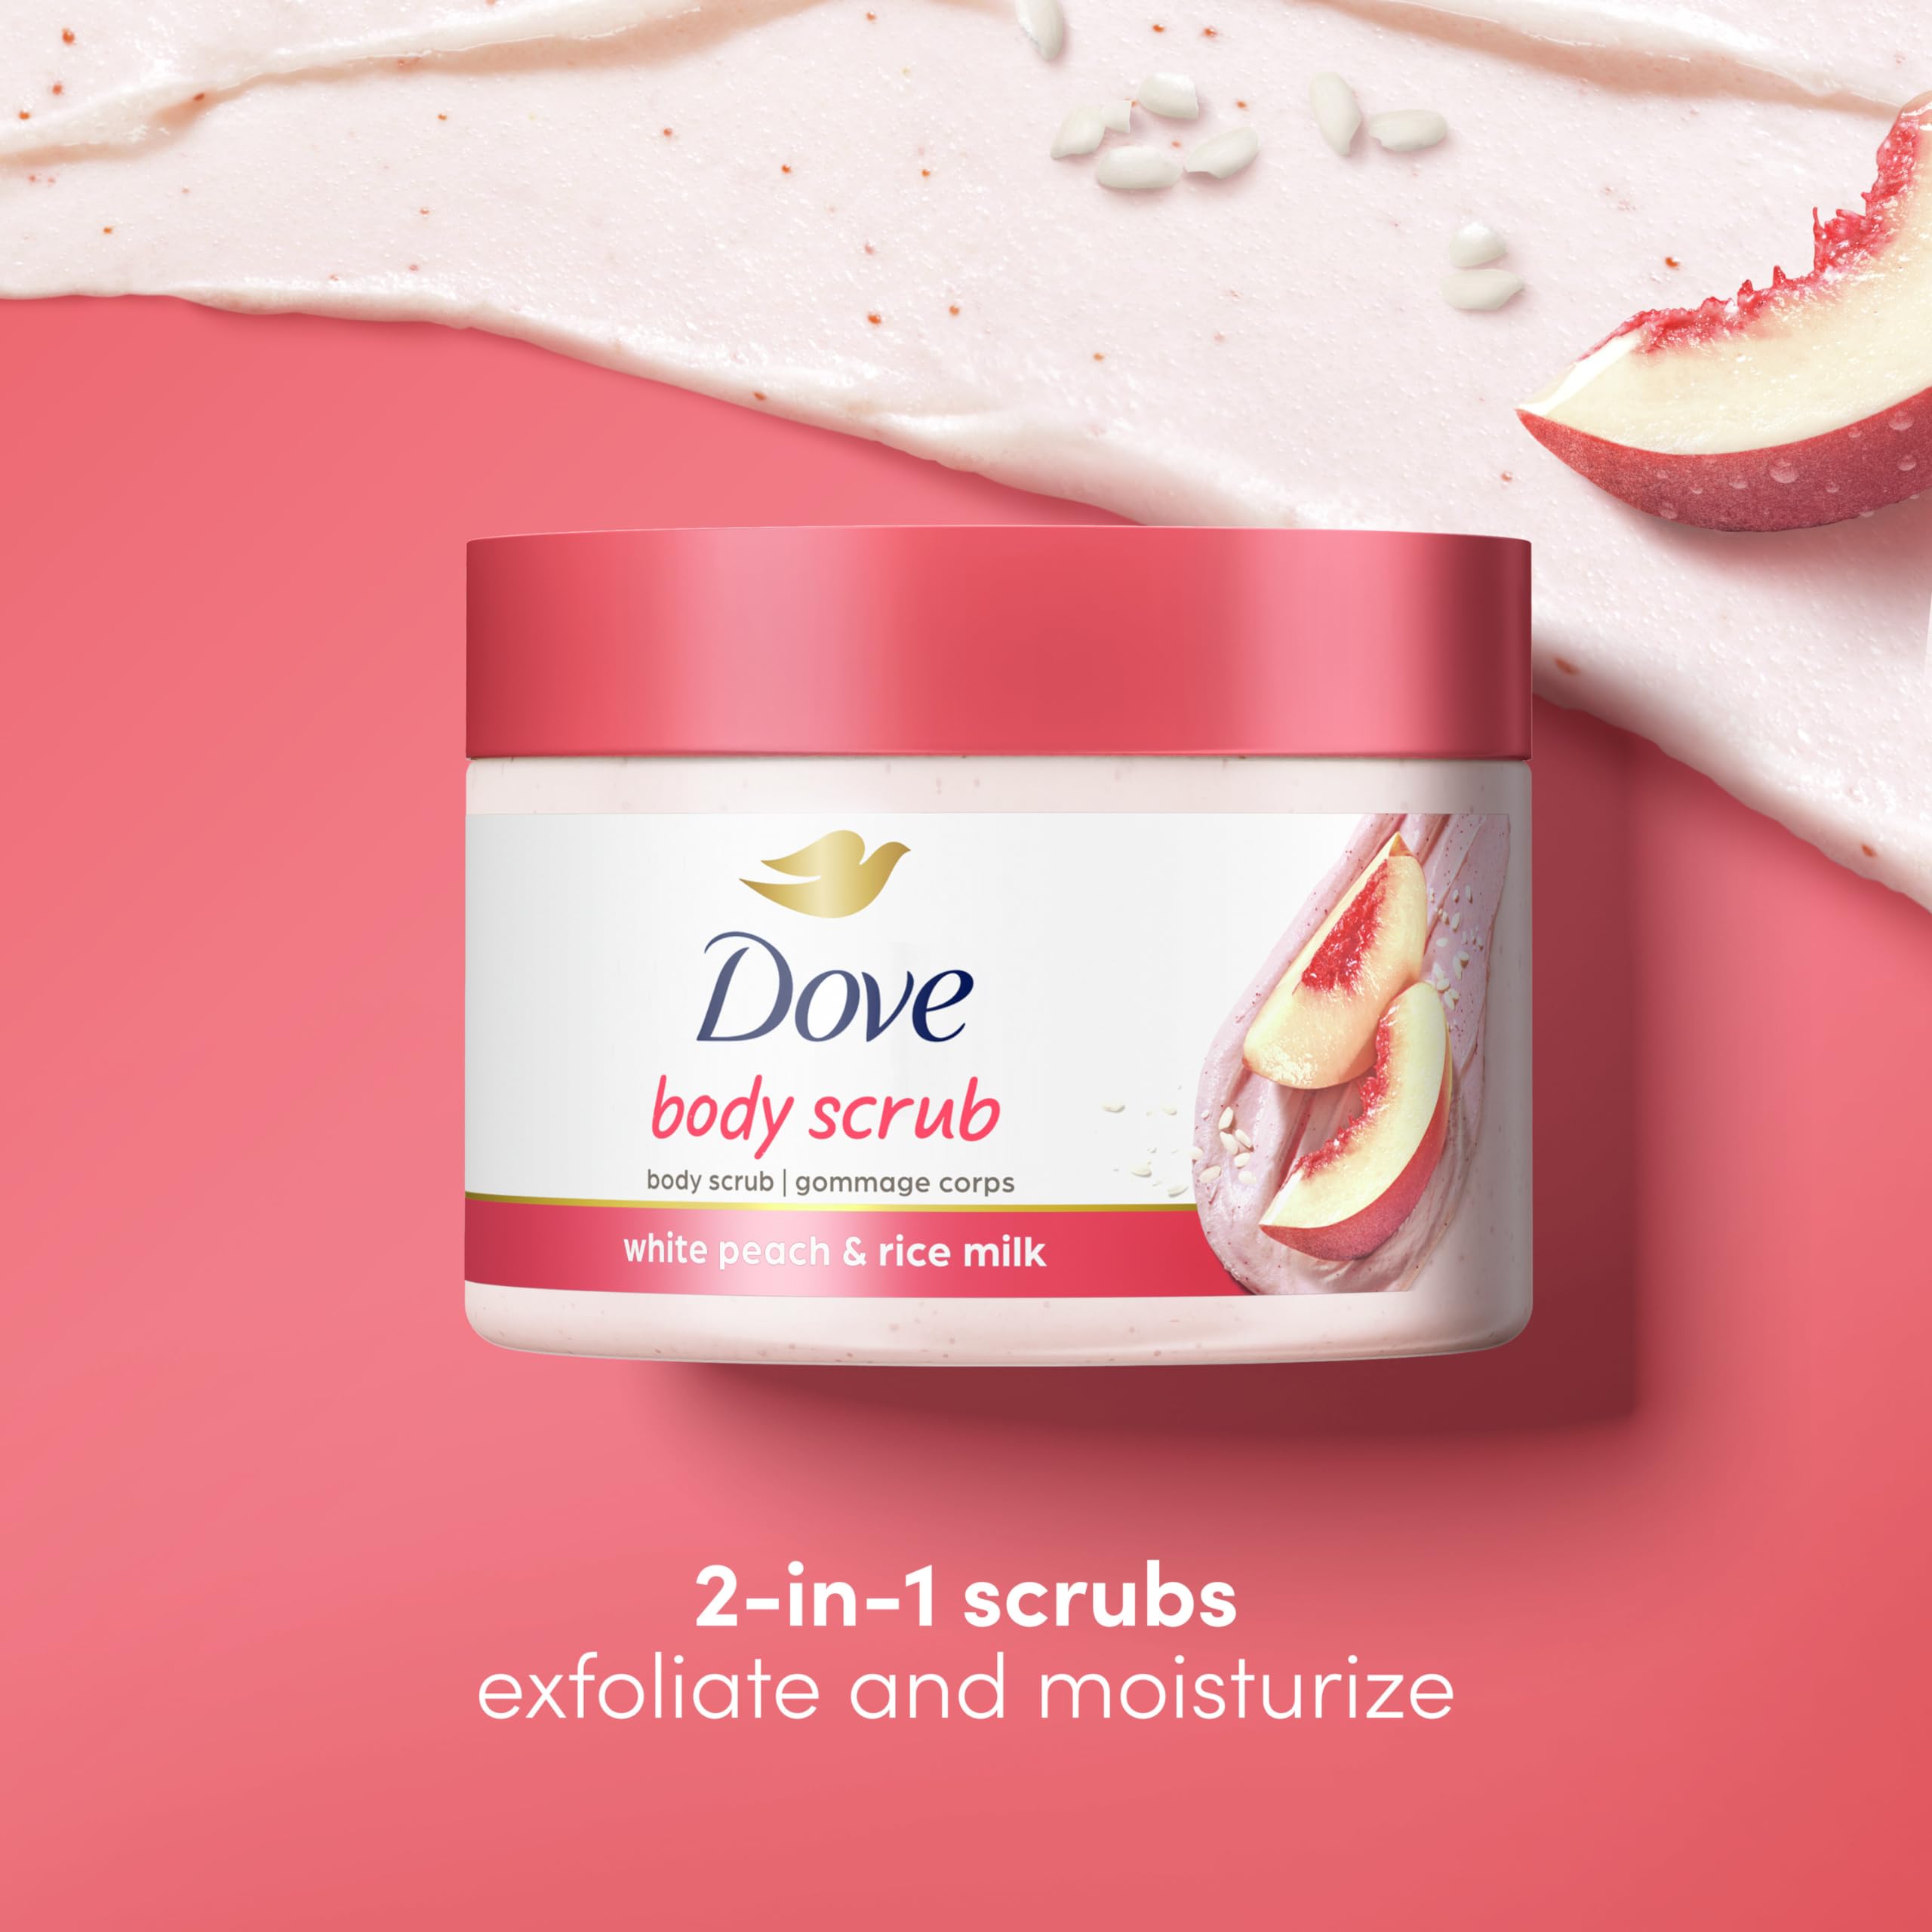 Dove Body Scrub White Peach & Crushed Rice 3 Count for Visibly Silky-Smooth, Nourished Skin, with ¼ Moisturizing Cream, 10.5 oz